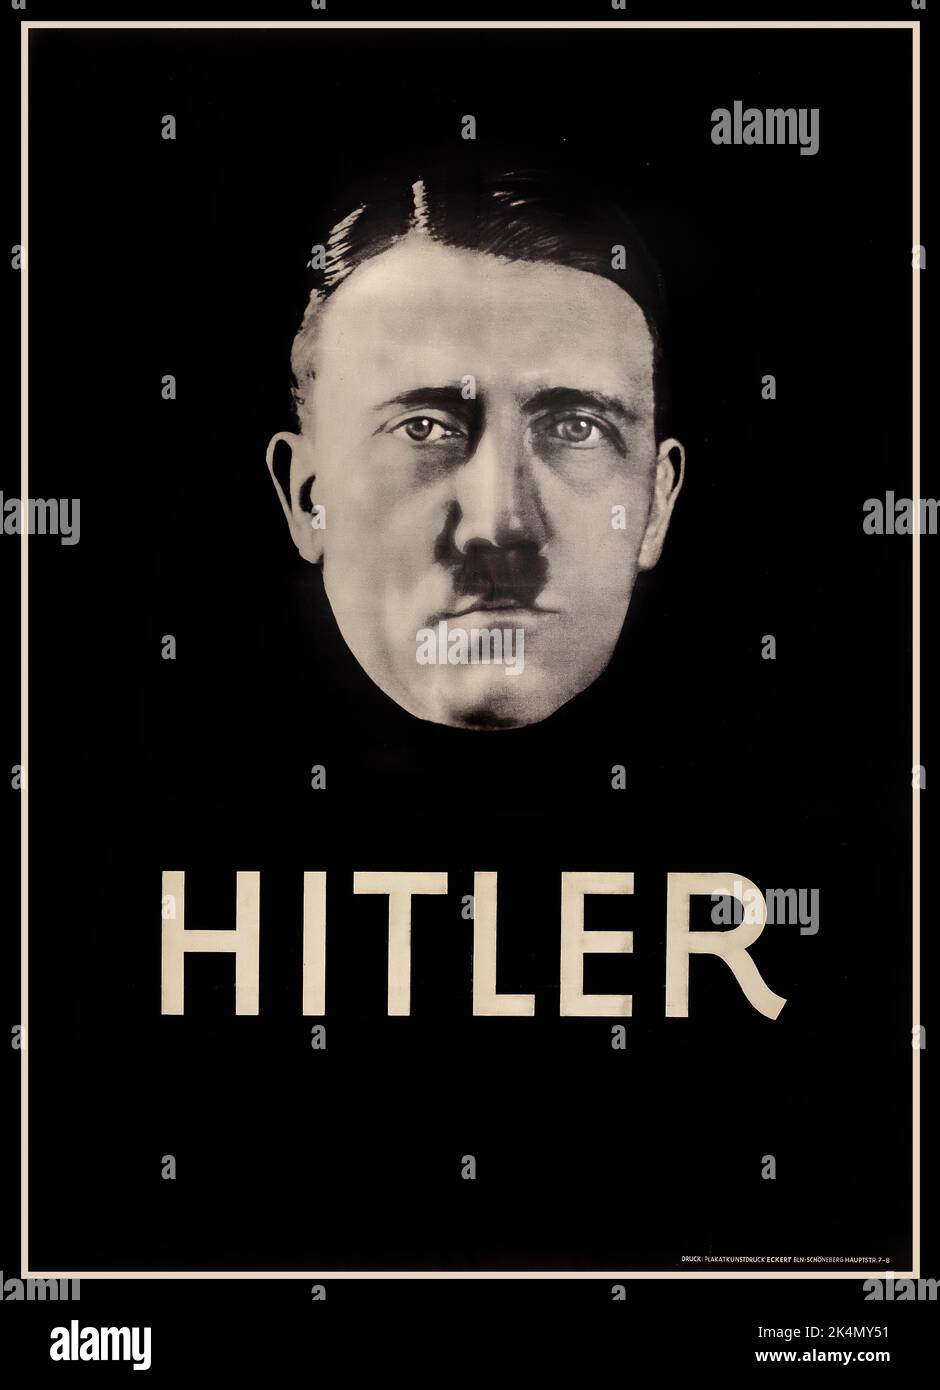 HITLER PORTRAIT ELECTION  Political poster promoting Adolf Hitler and the Nazi Party NSDAP in the 1932 Germany presidential election (March/April).ADOLF HITLER POSTER NSDAP Pre-war election poster for Adolf Hitler National Socialist Party ( Nazi ) 1930s Stock Photo